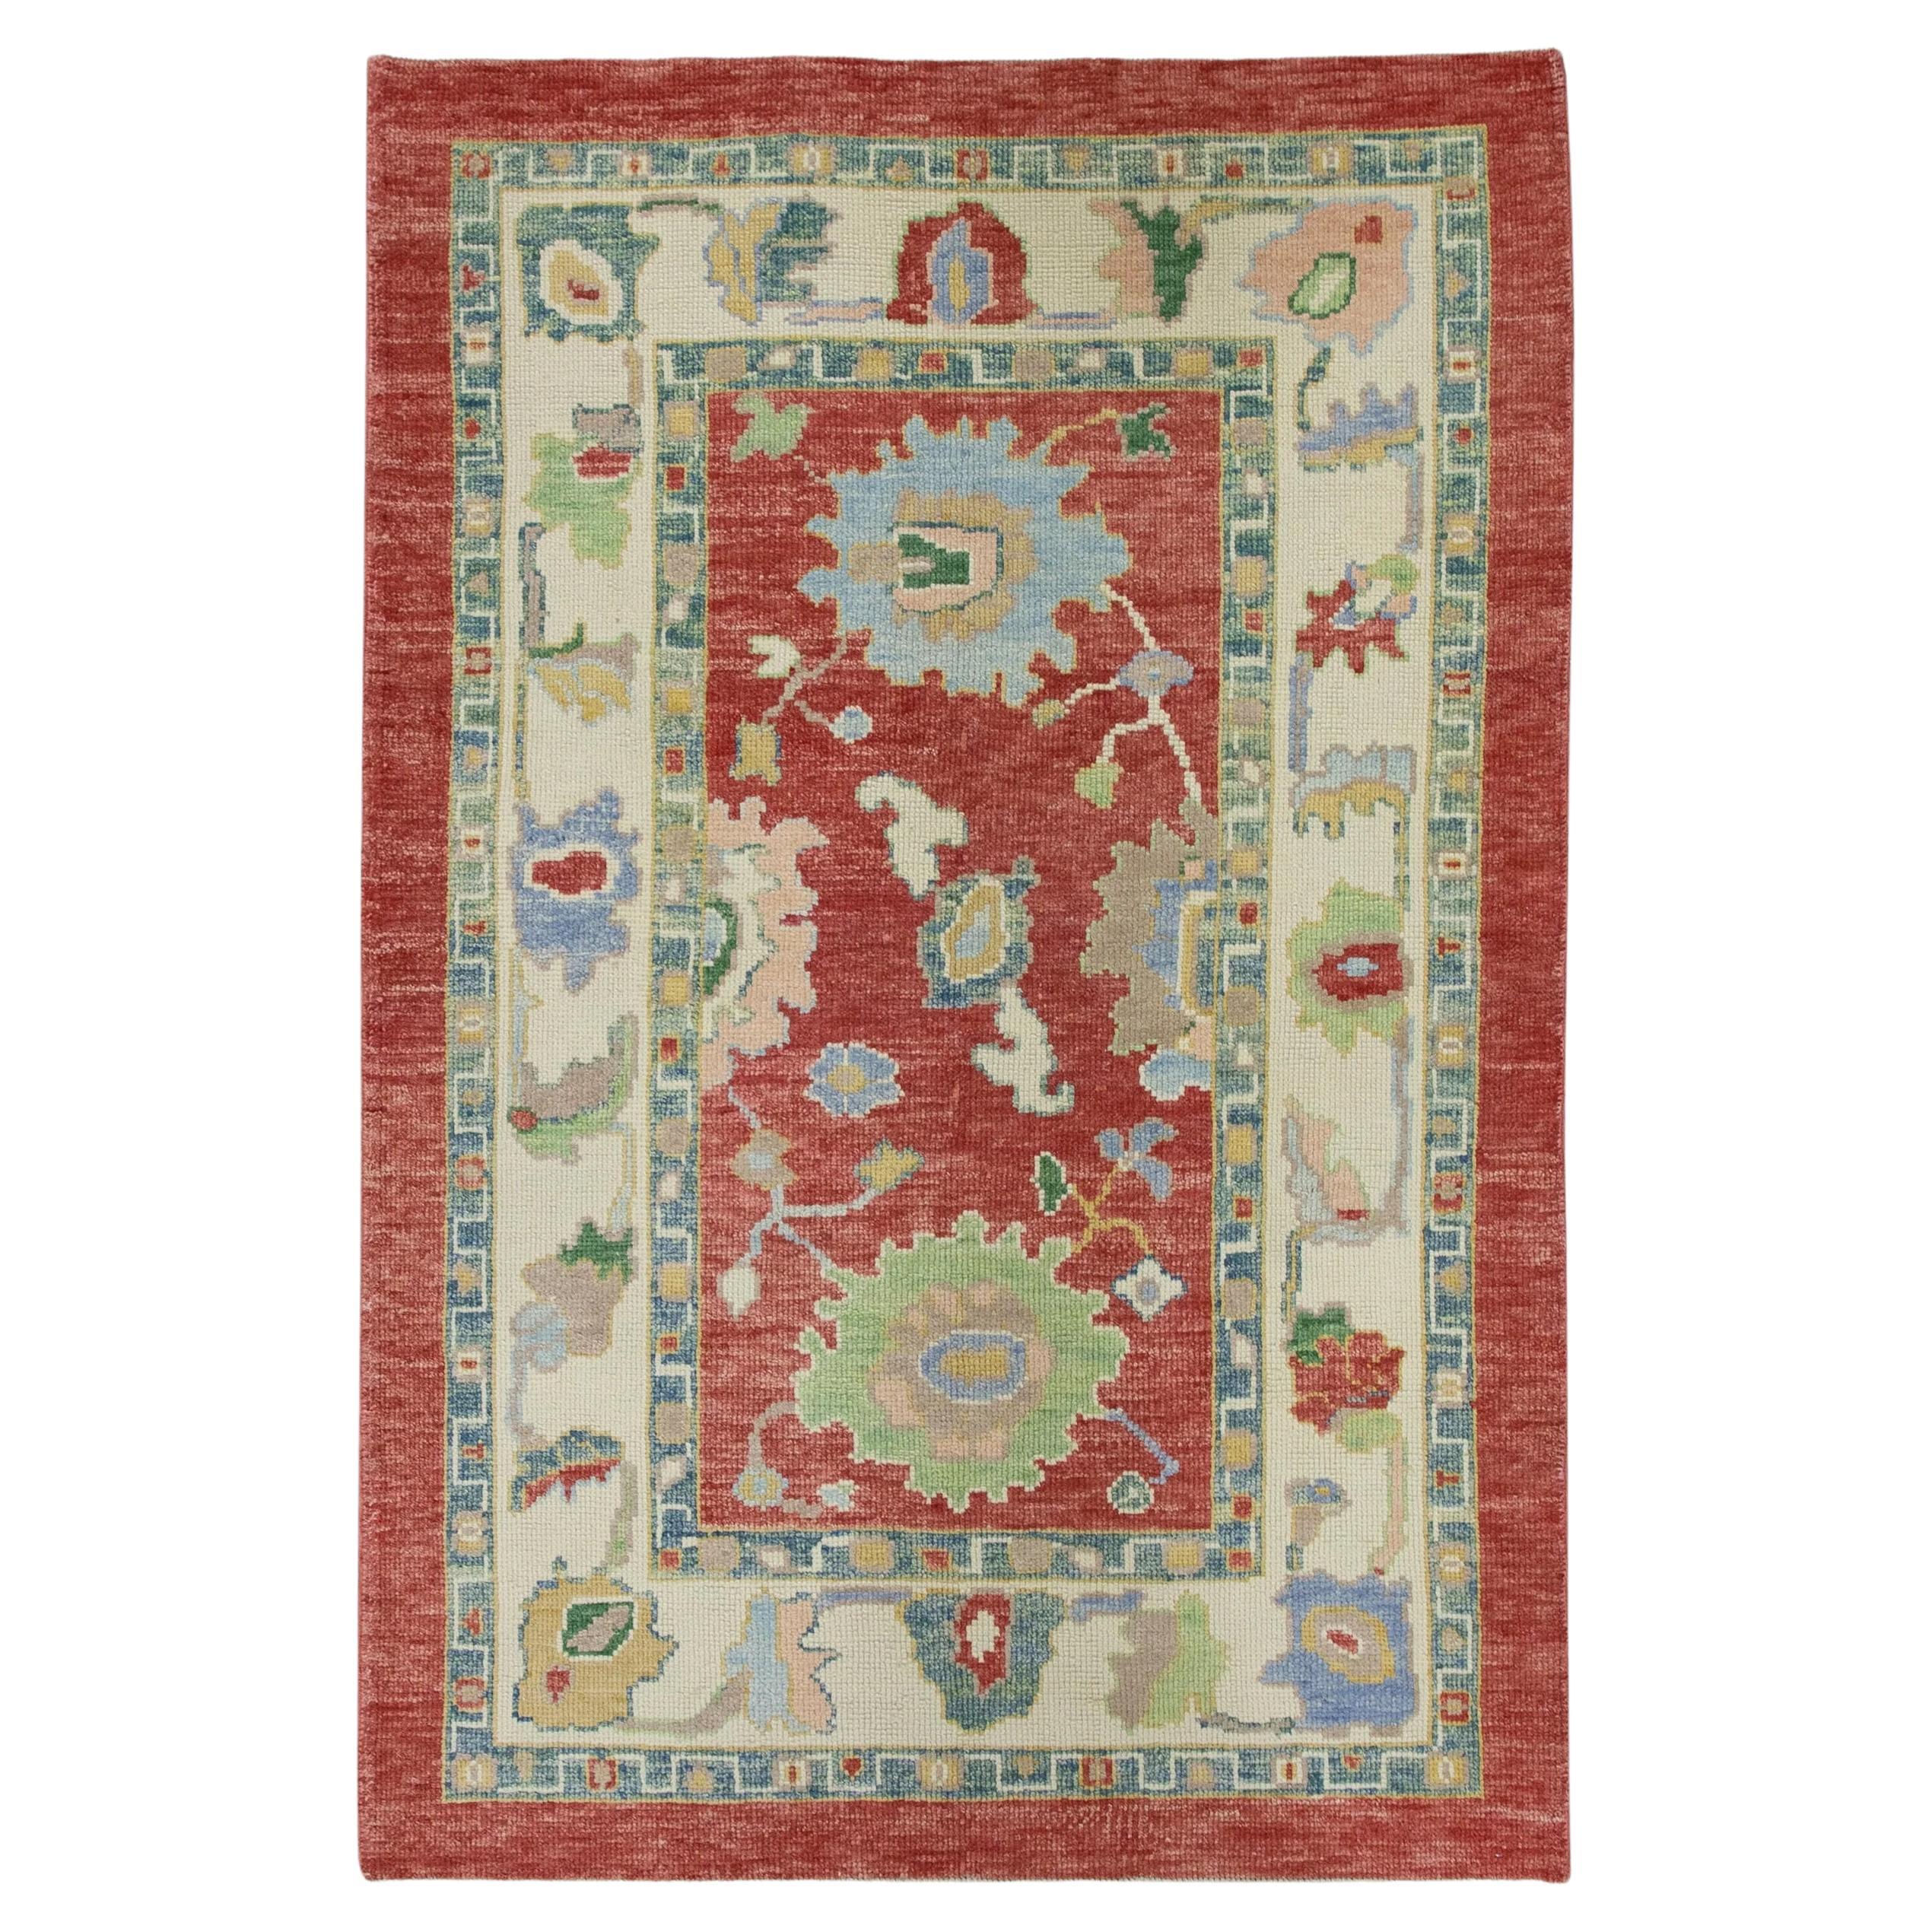 Red Handwoven Wool Turkish Oushak Rug in Blue & Green Floral Design 4'3" x 6'4" For Sale